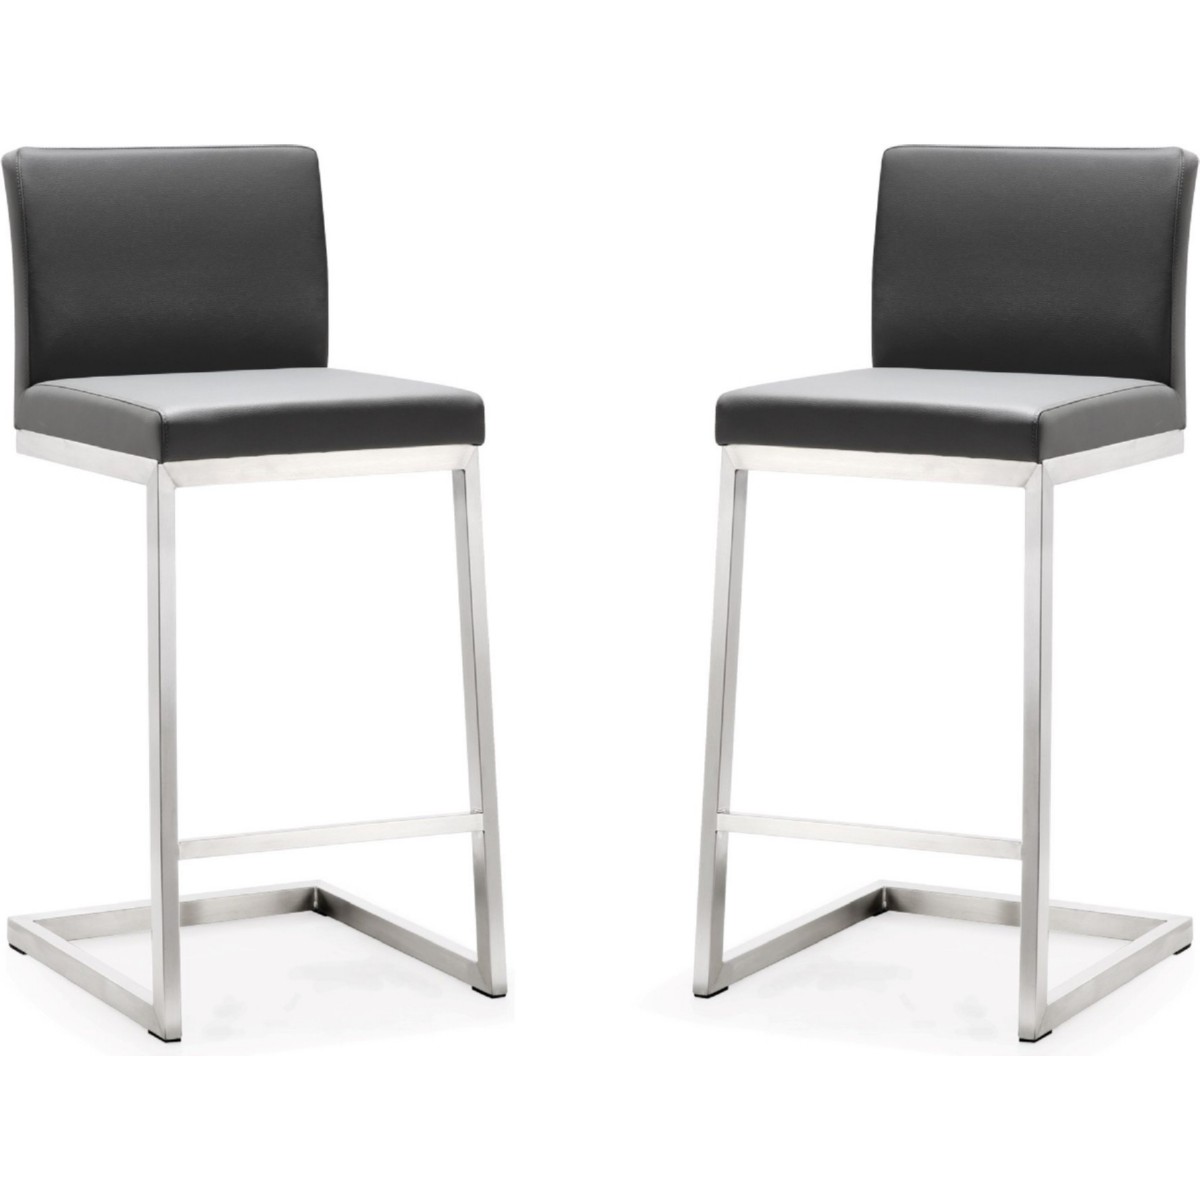 TOV-K3606 Parma Stainless Steel Counter Stool  Grey - Set of 2 -  Tov Furniture